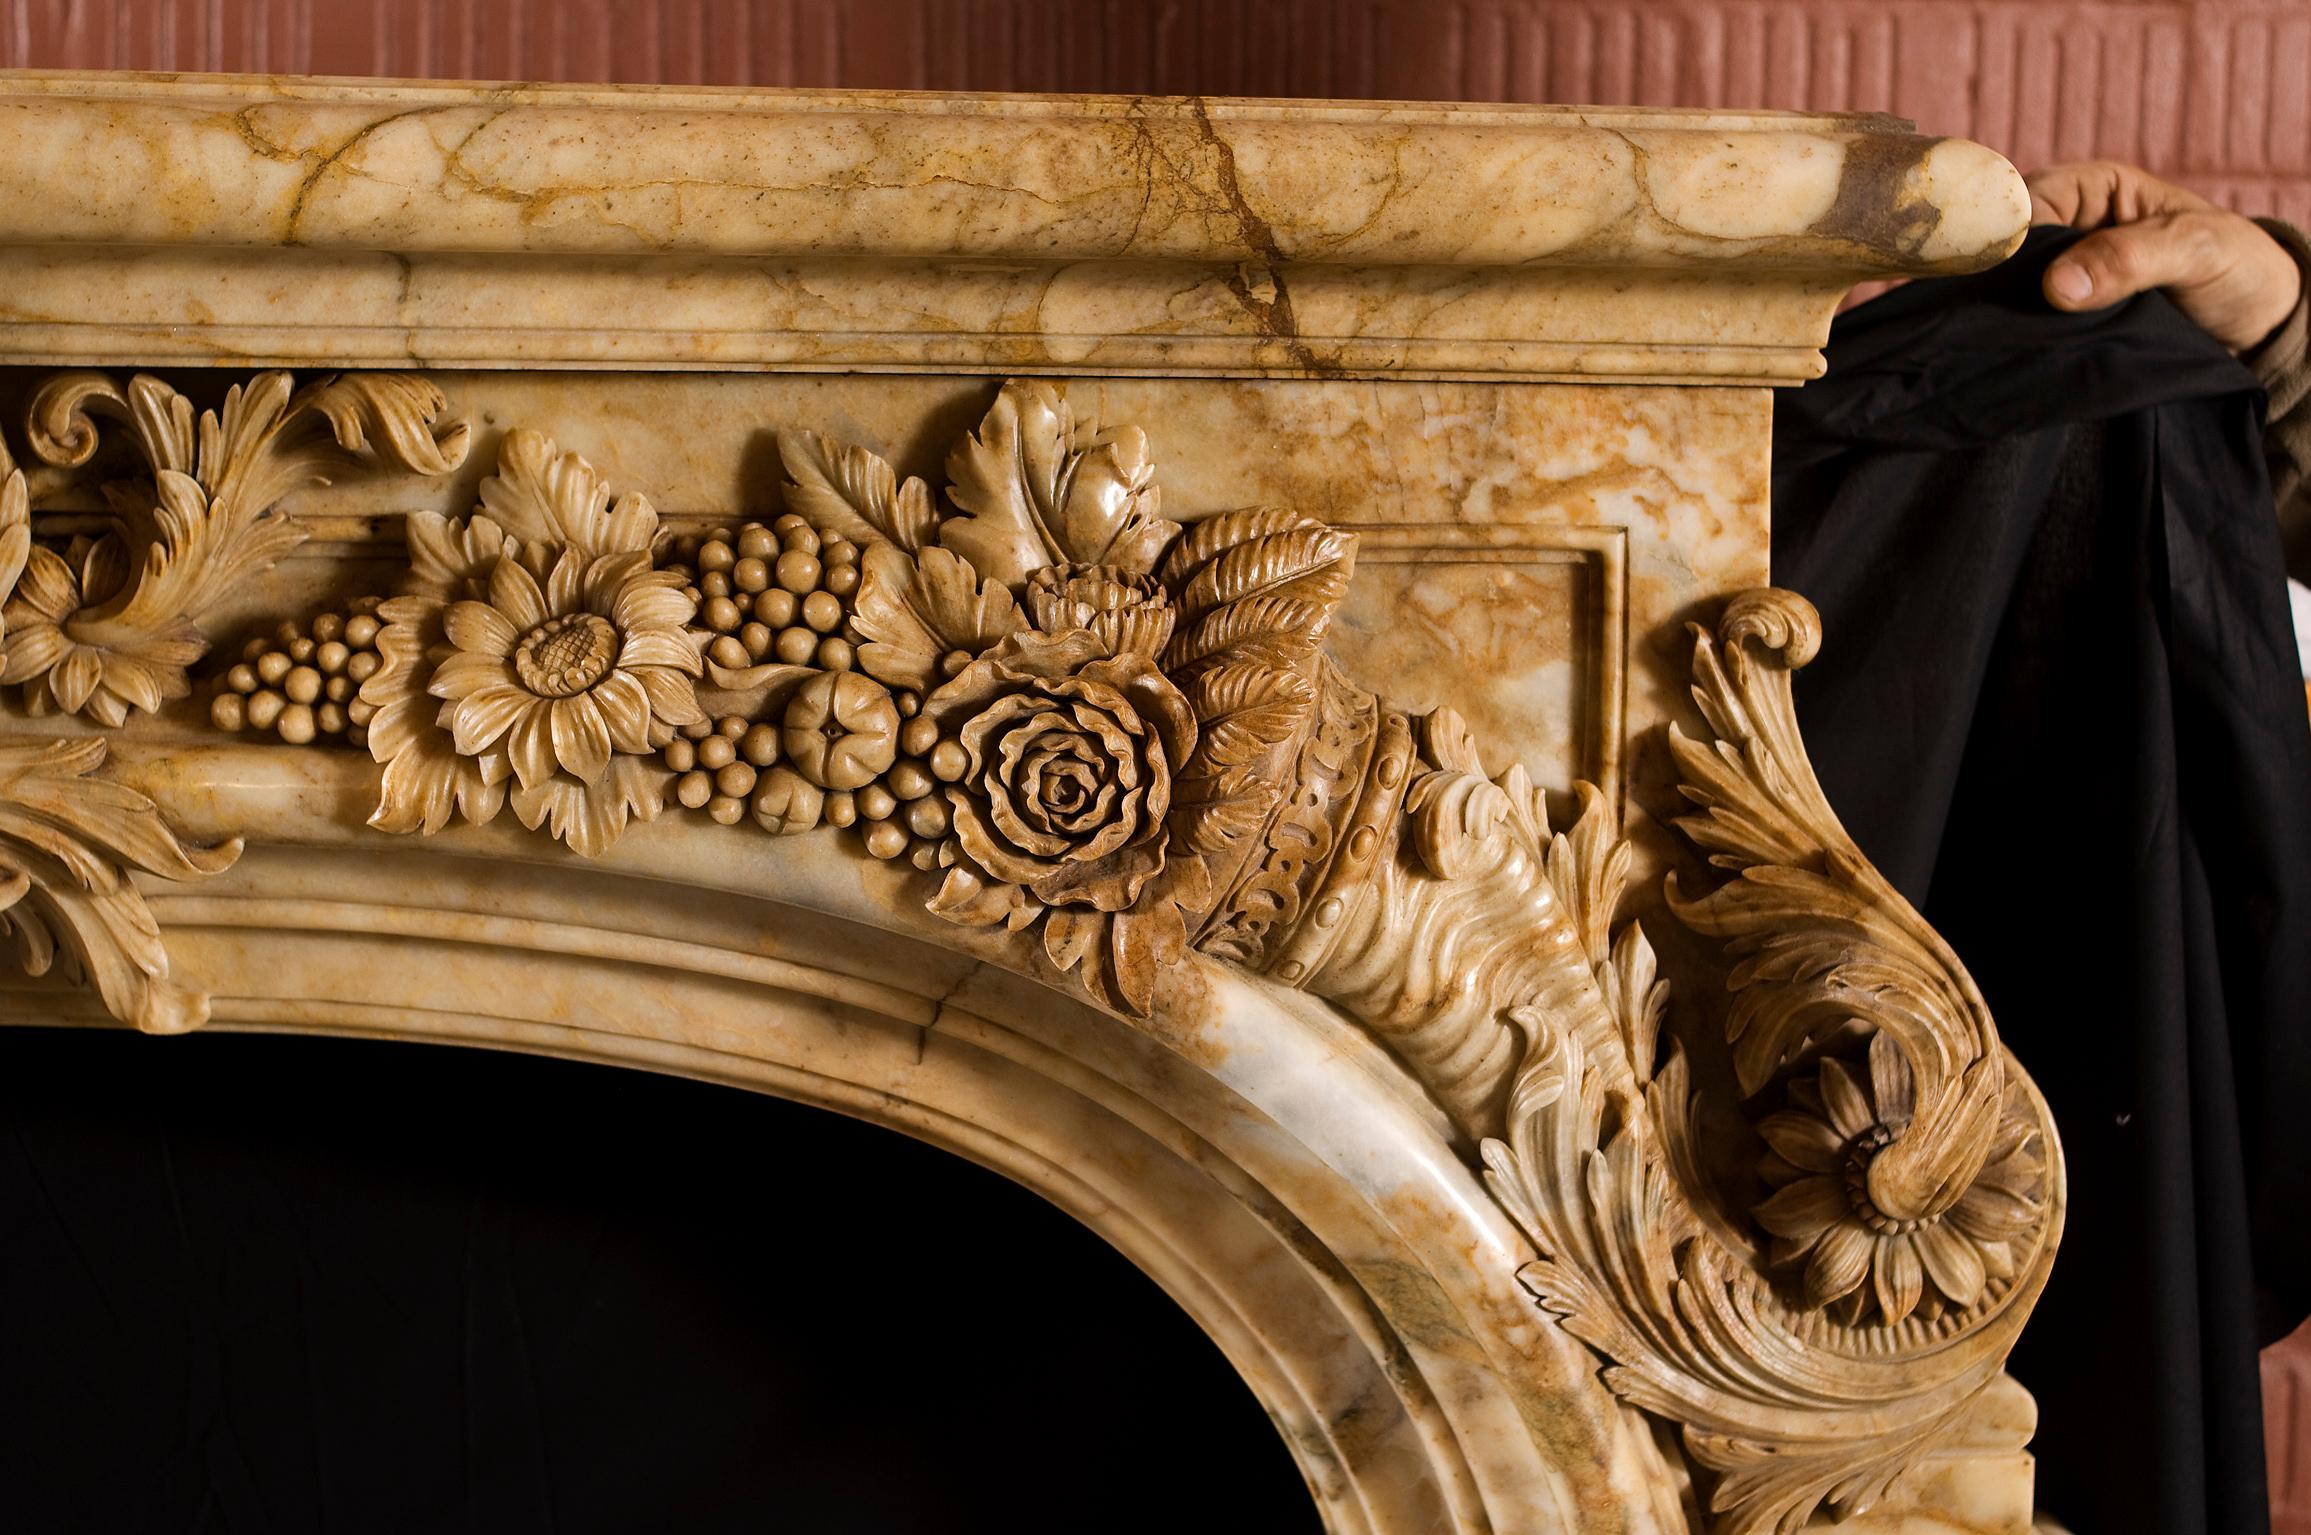 This exceptional Regency style fireplace model was made for the 